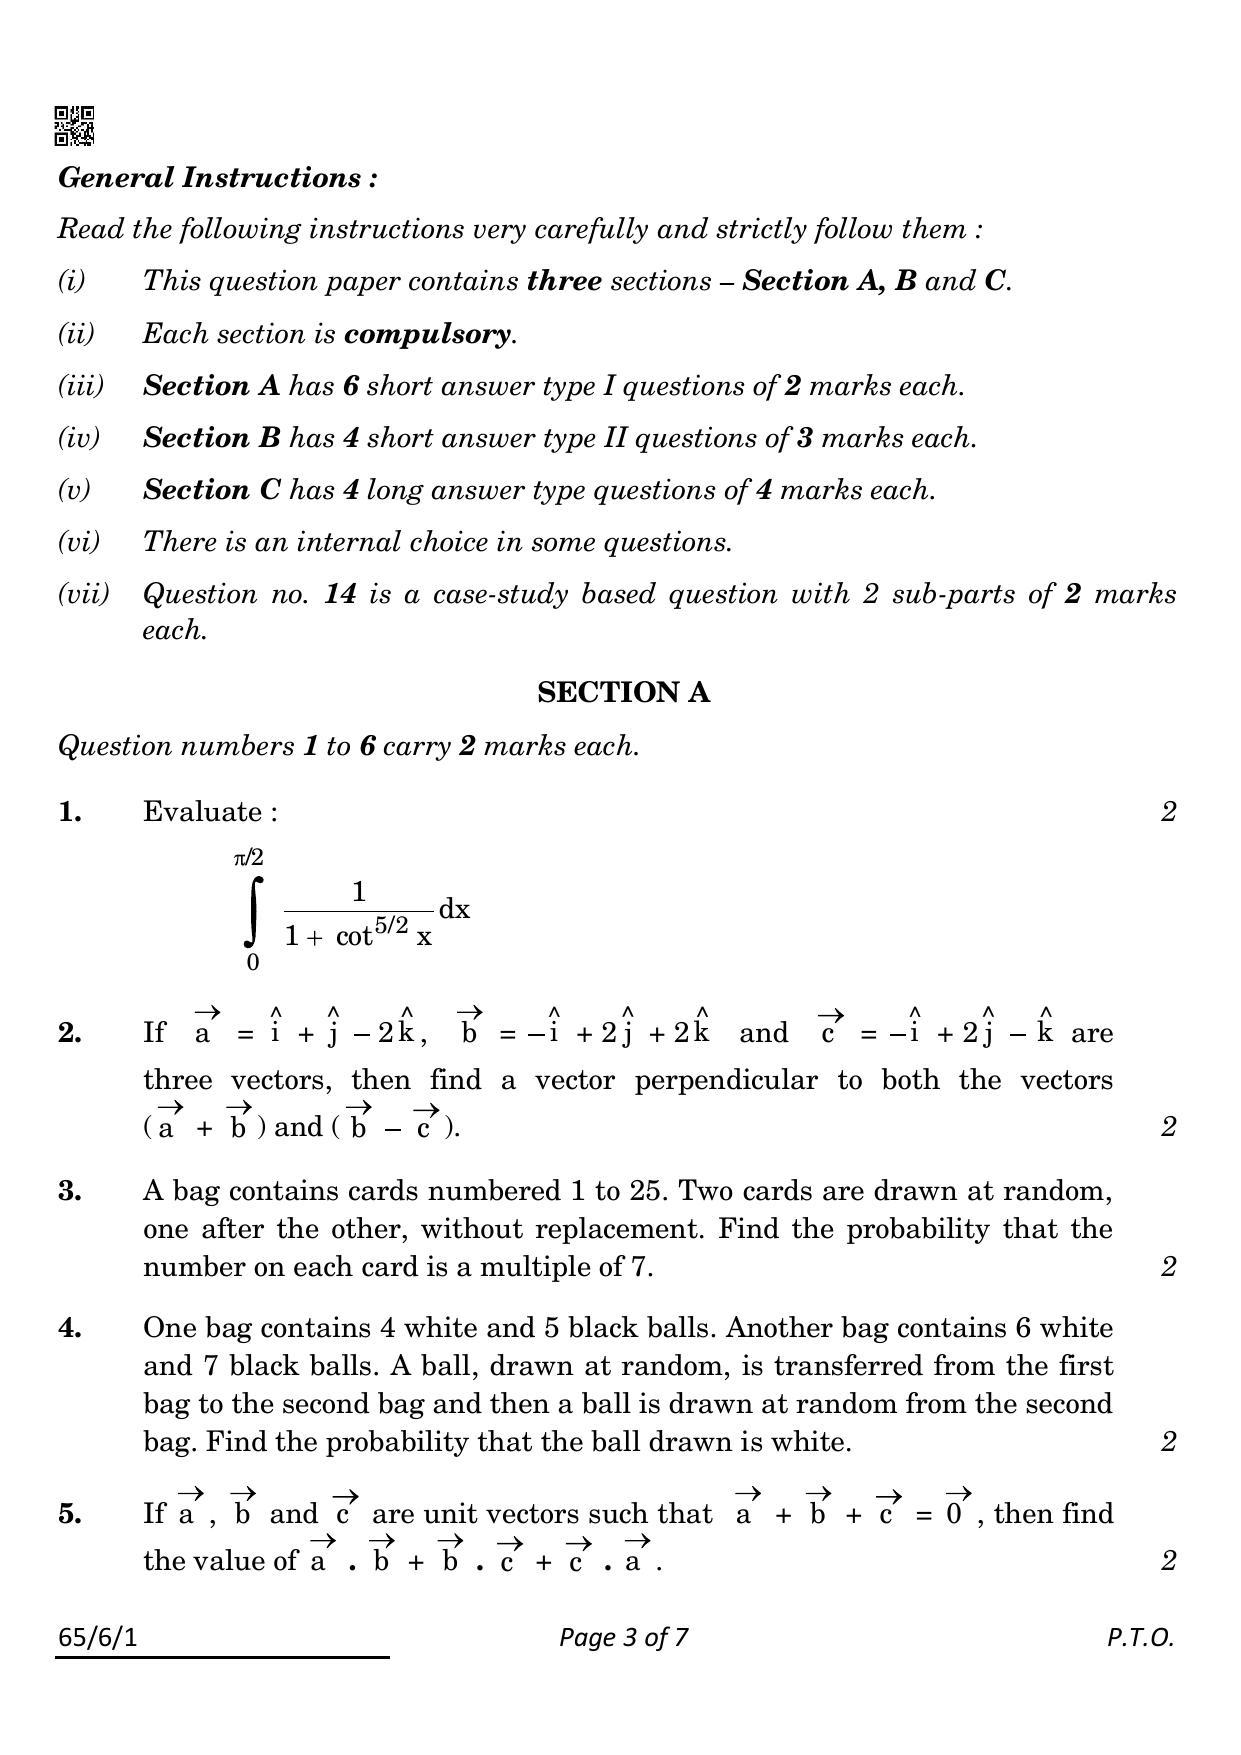 CBSE Class 12 65-6-1 MATHS 2022 Compartment Question Paper - Page 3